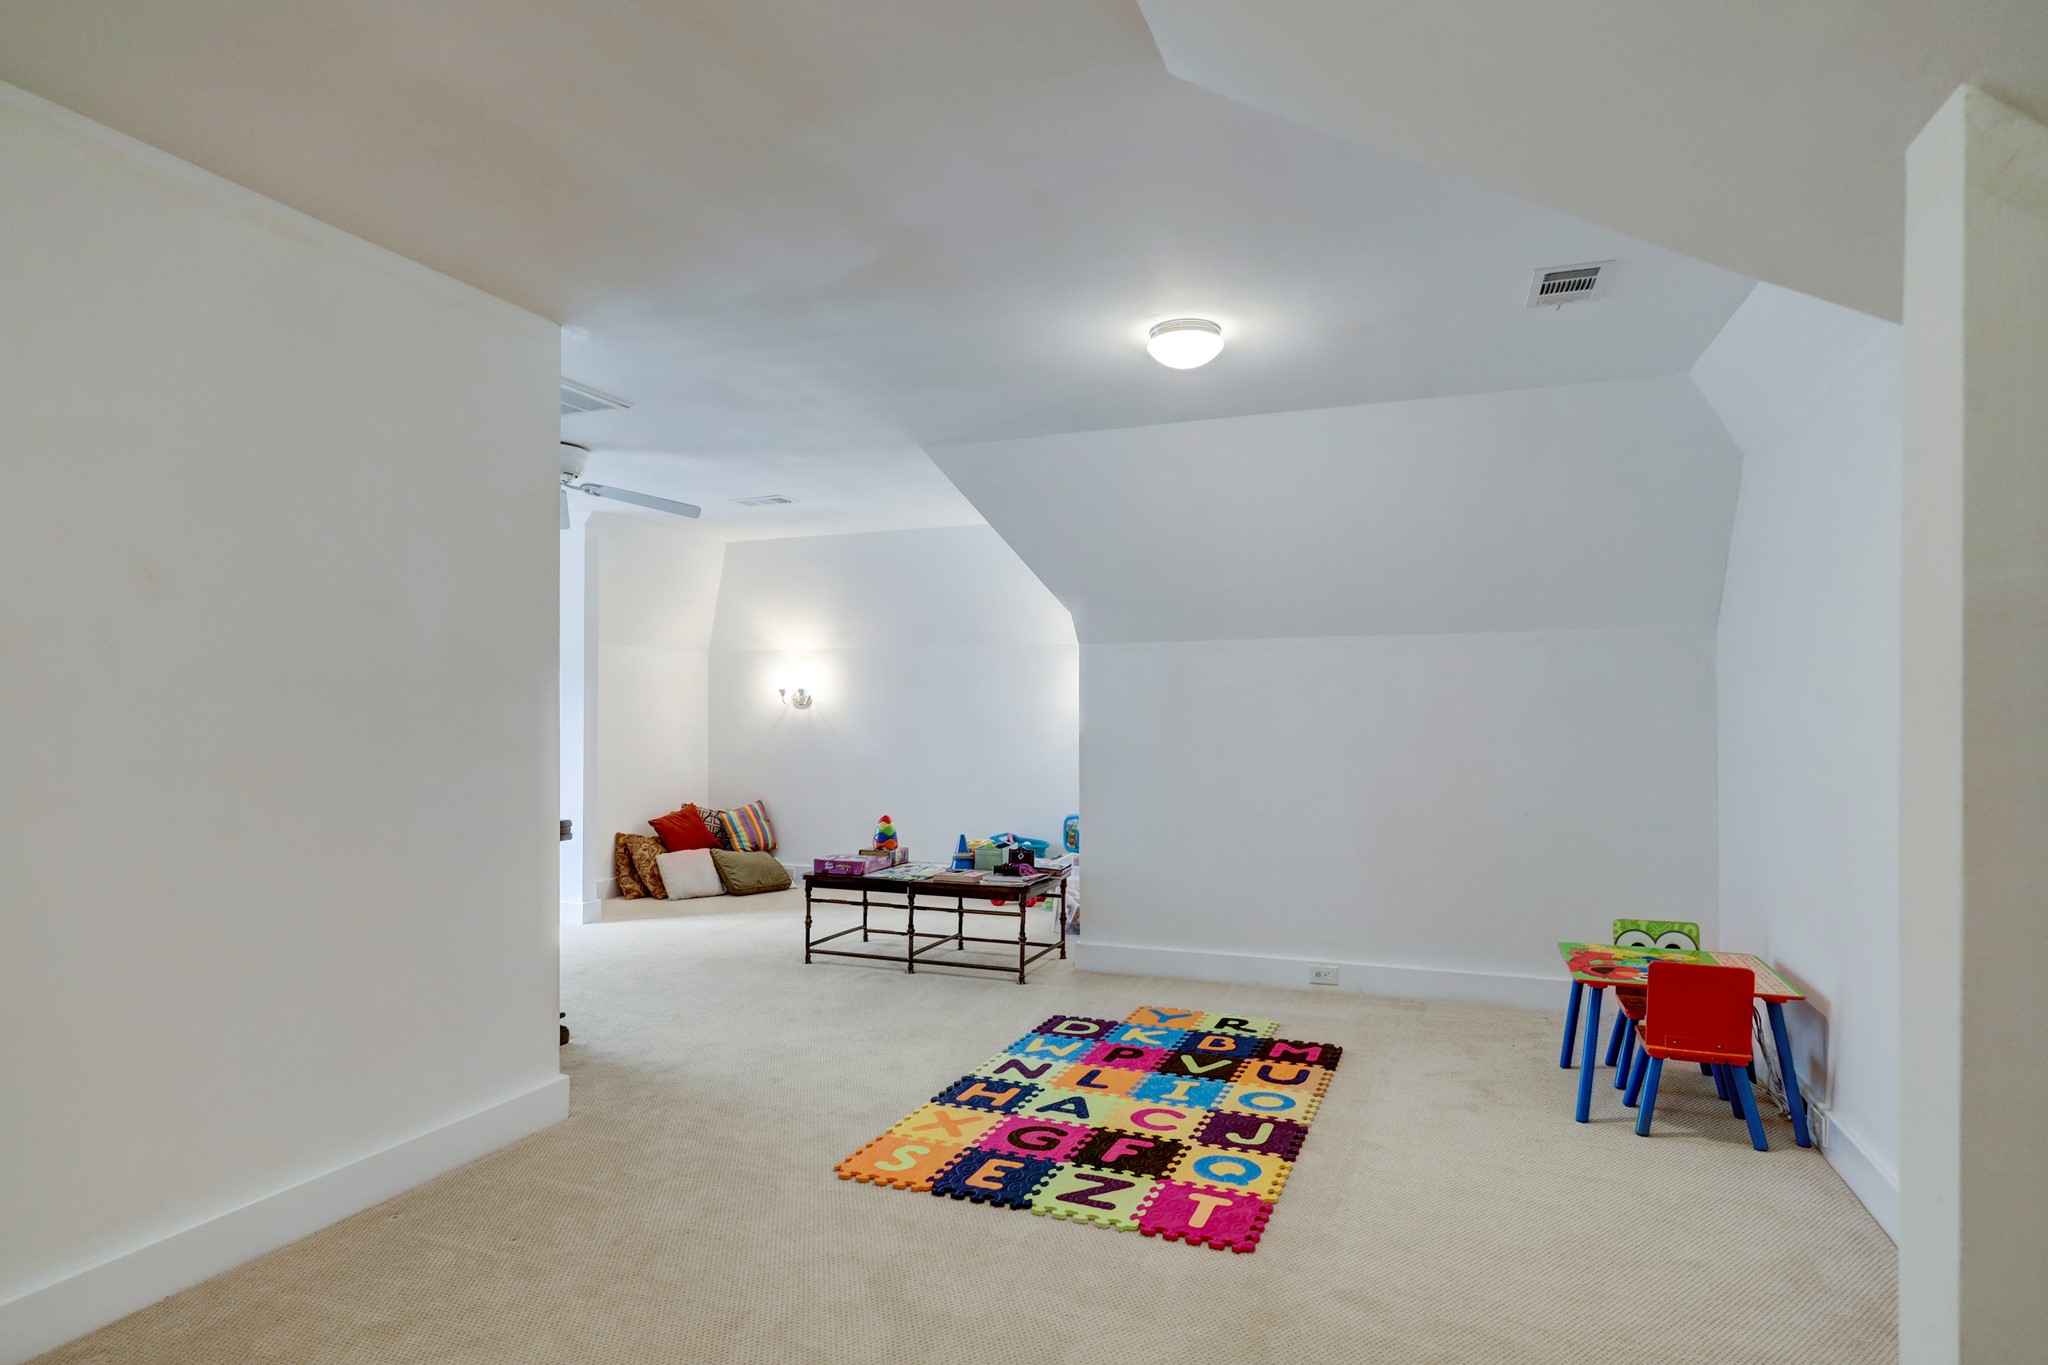 Located on the third floor is bonus space galore. Use it as a playroom, workout space, home office, media room...the possibilities are endless.